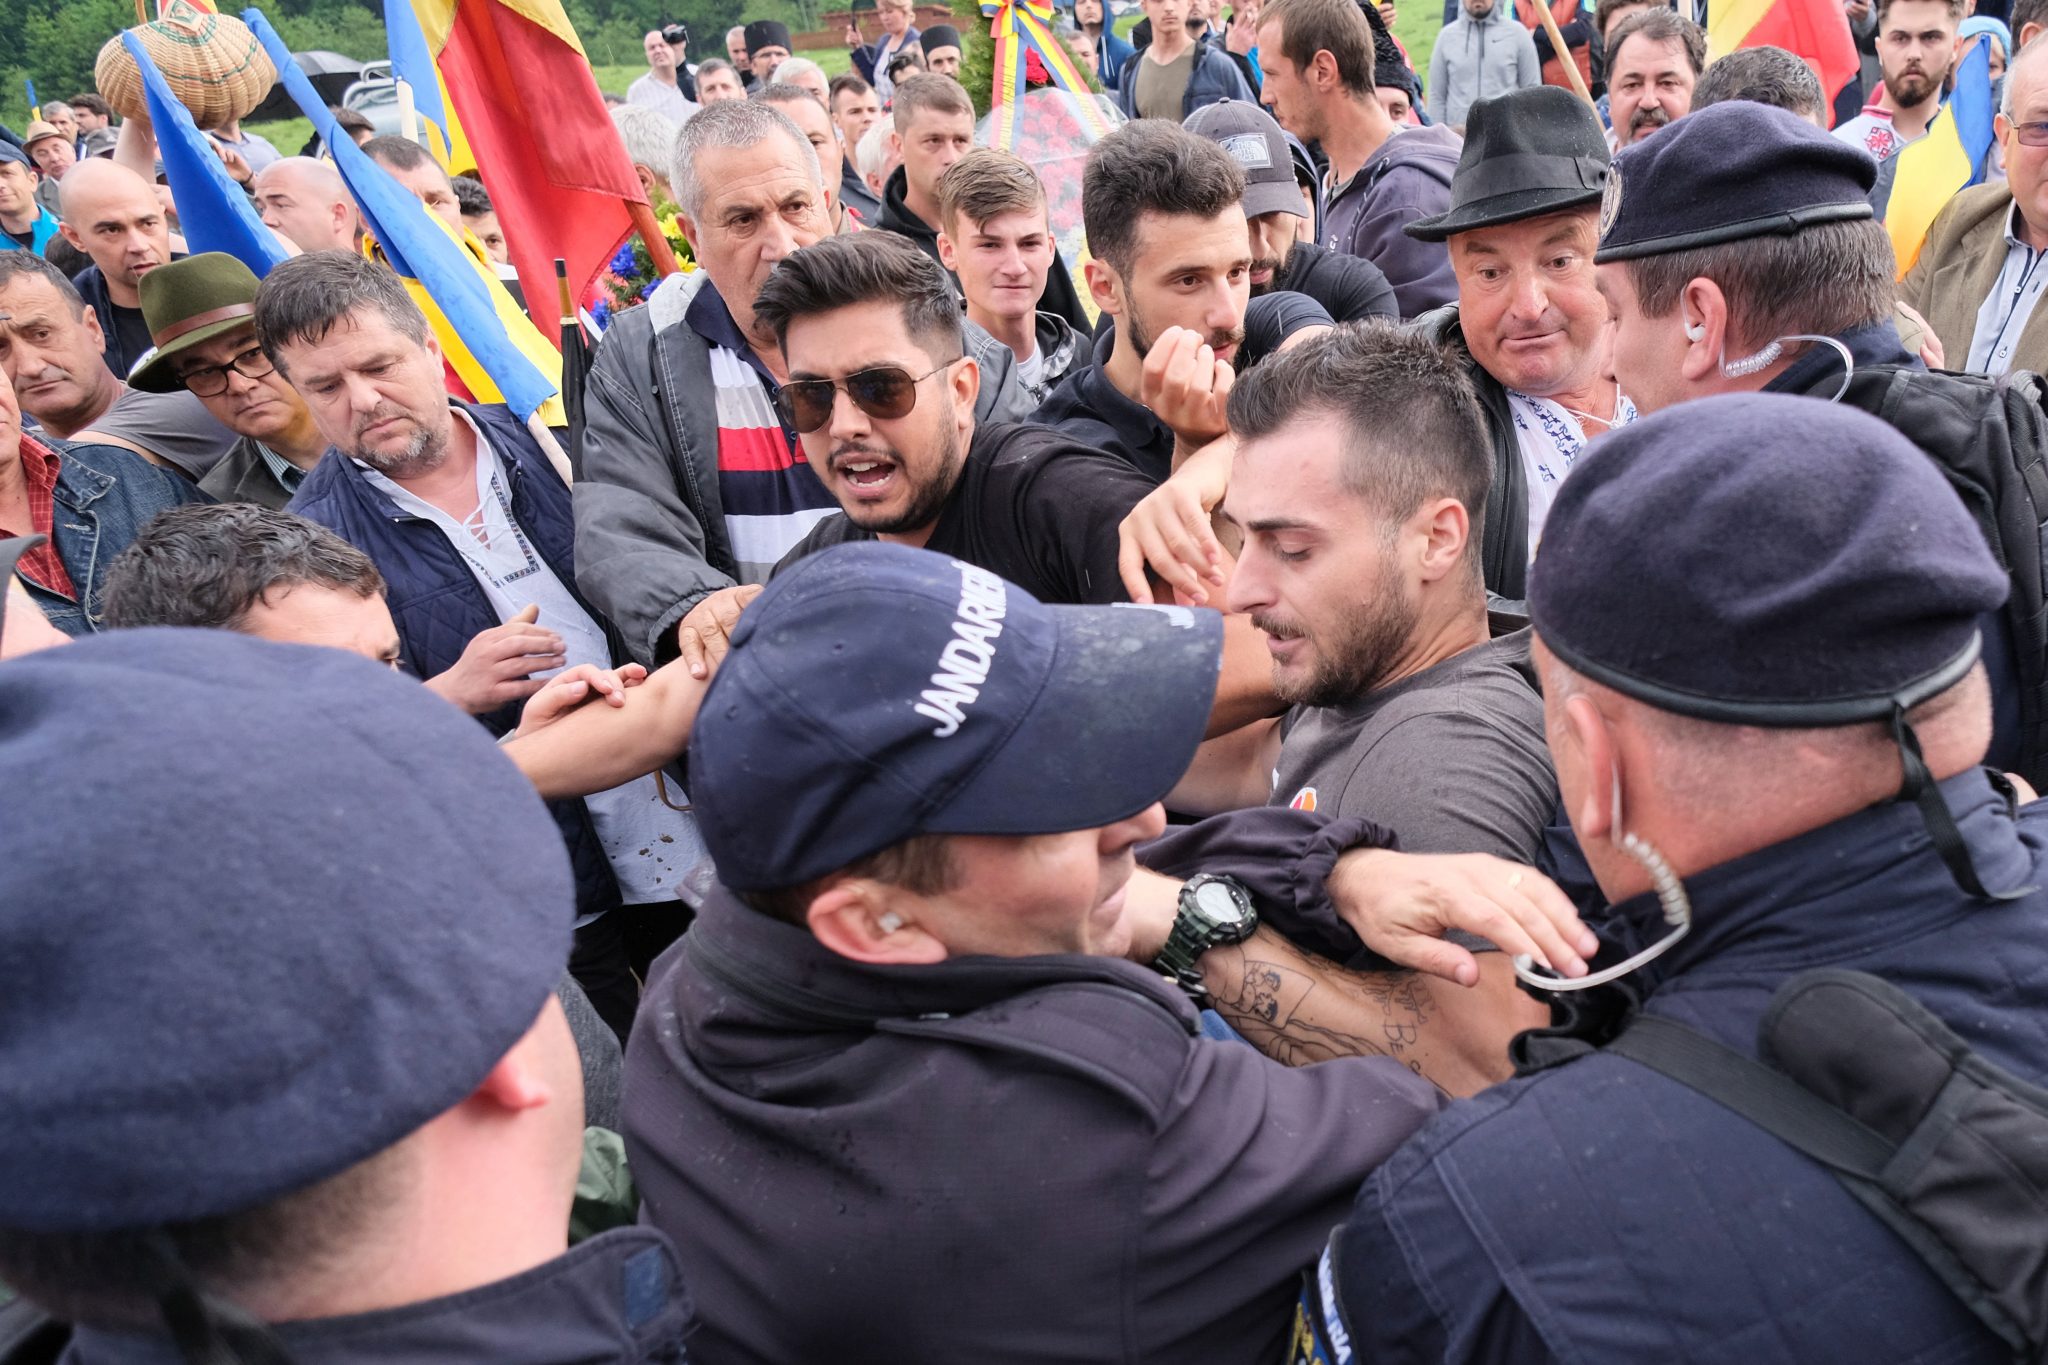 Angry Romanians Break into Úzvölgye WW1 Memorial Site, Attack Peaceful Hungarian Protesters